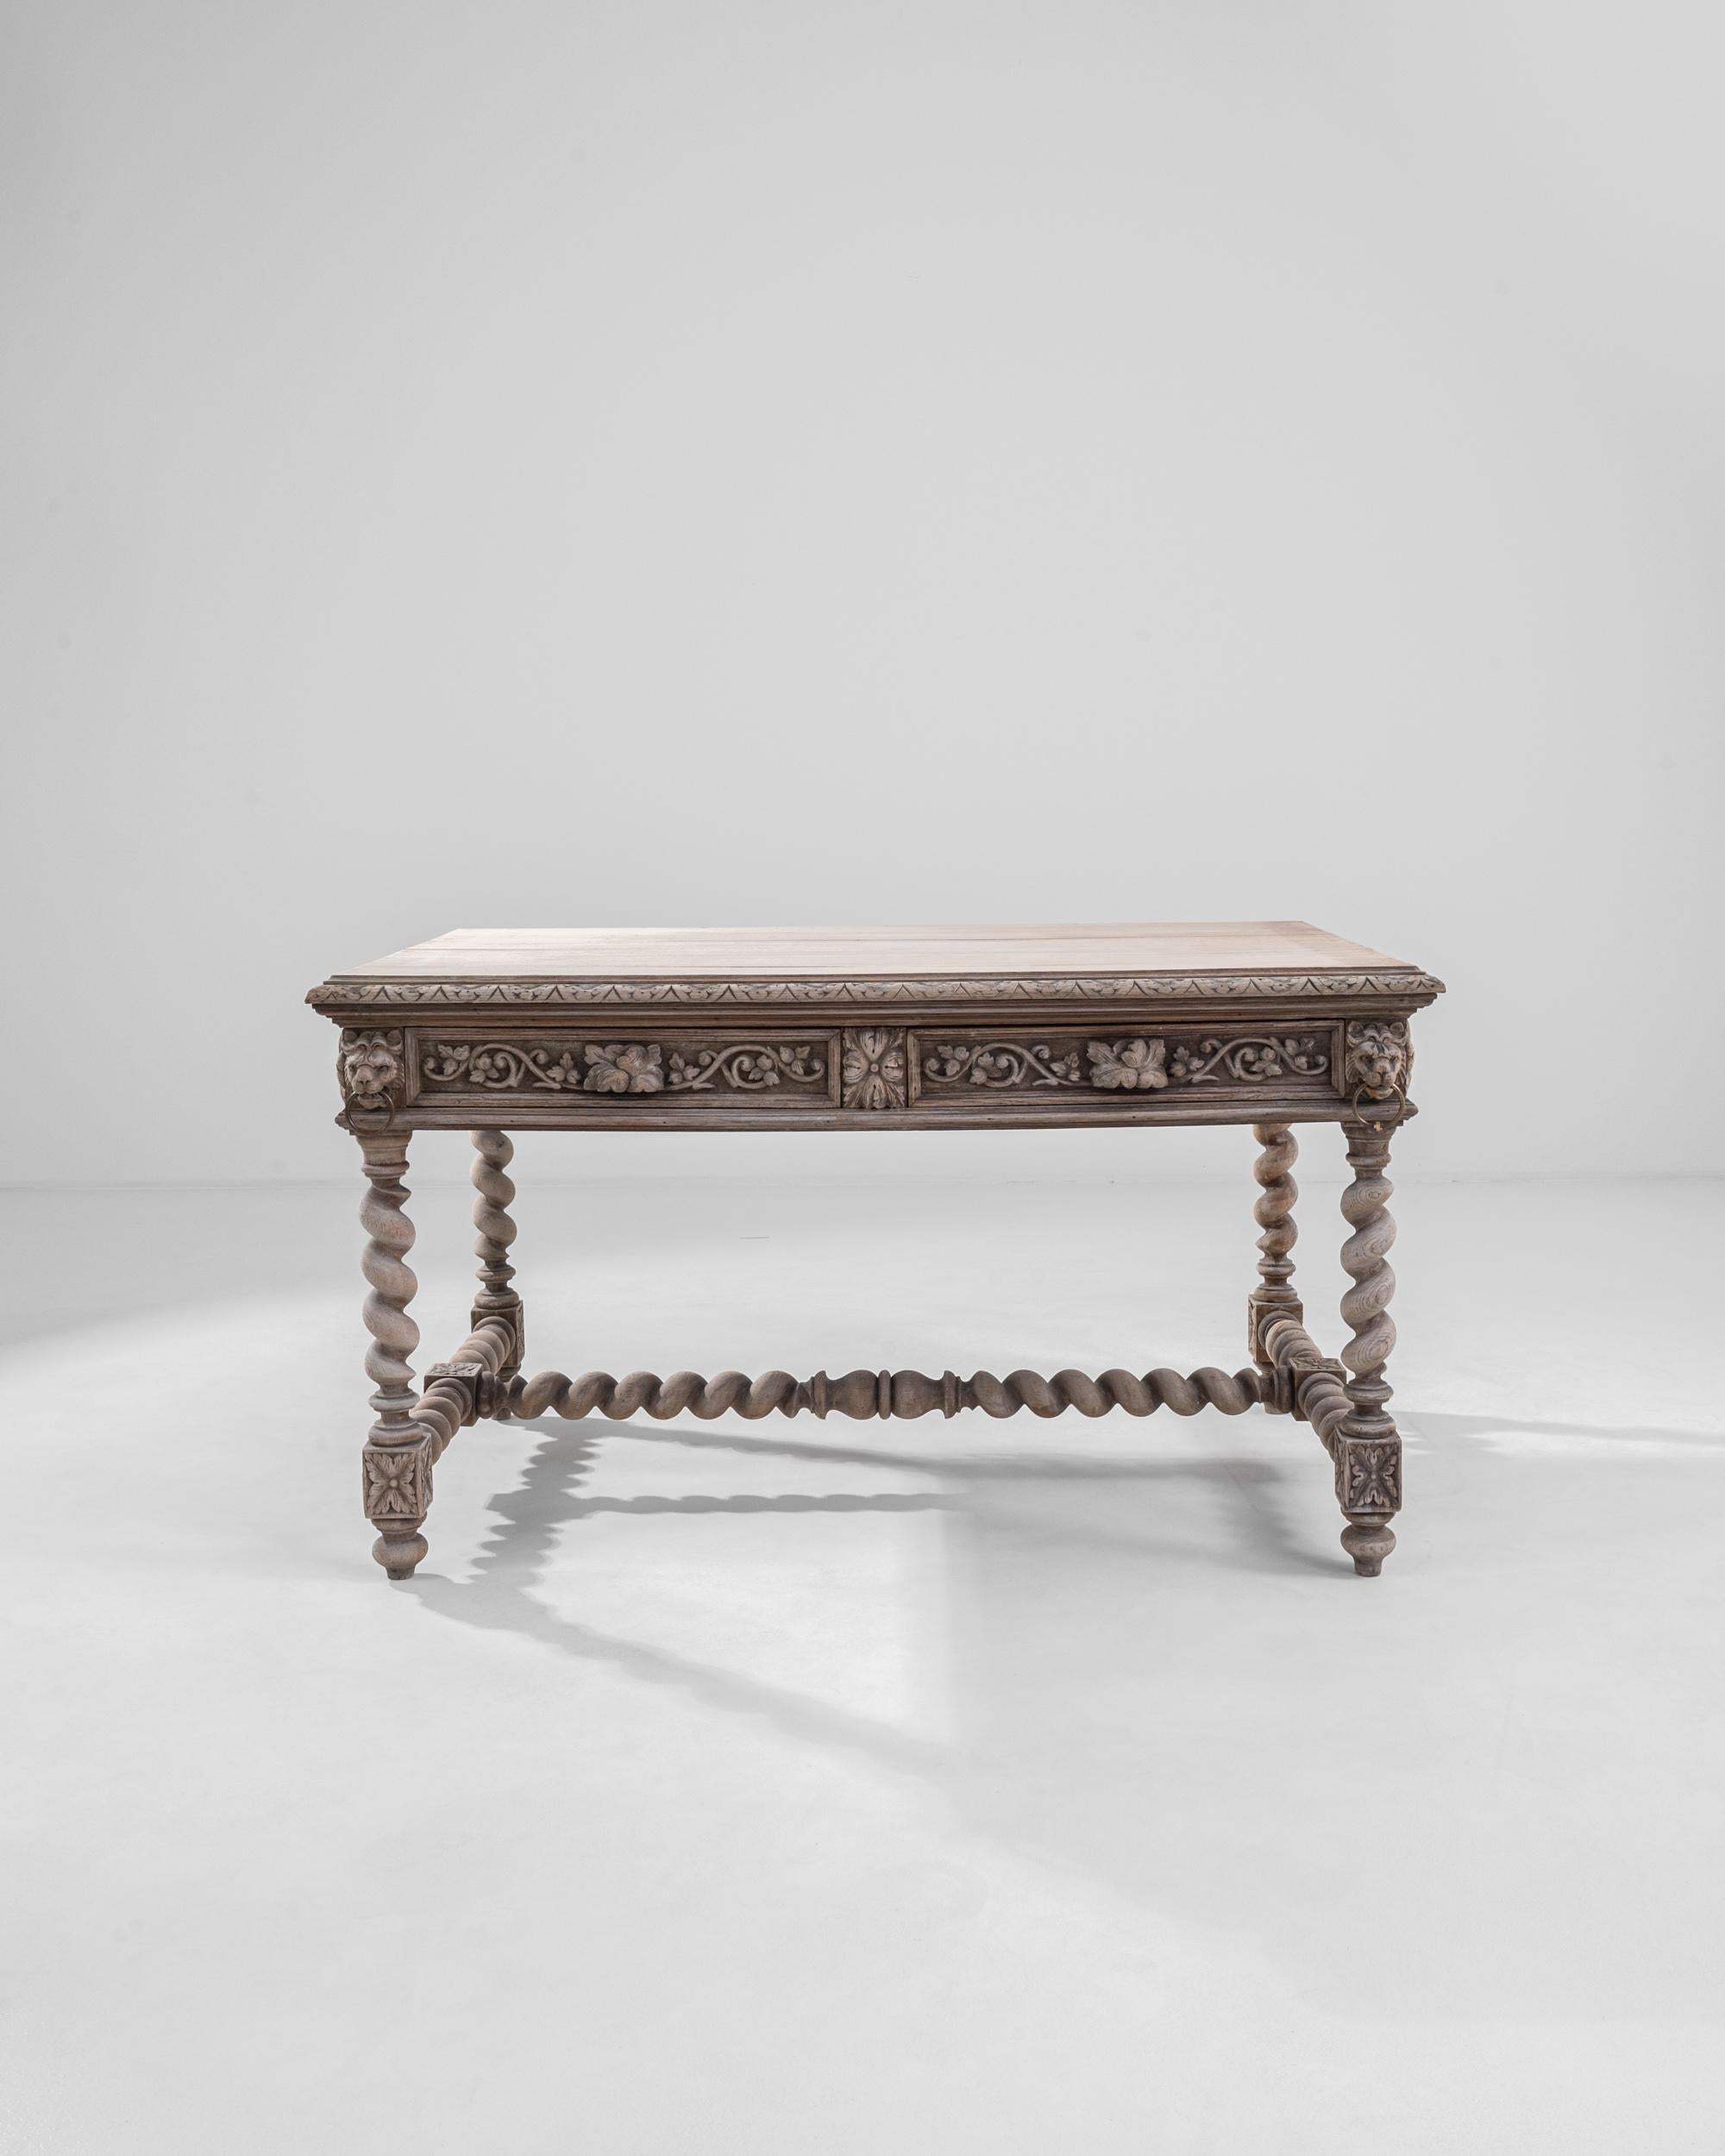 An oak dining table from Belgium circa 1900. Resonating with a distinctive Flemish Northern Baroque style, twisting legs and stretchers form the structure of this table, which shimmer in synergy with the array of scrupulously curved motifs that line